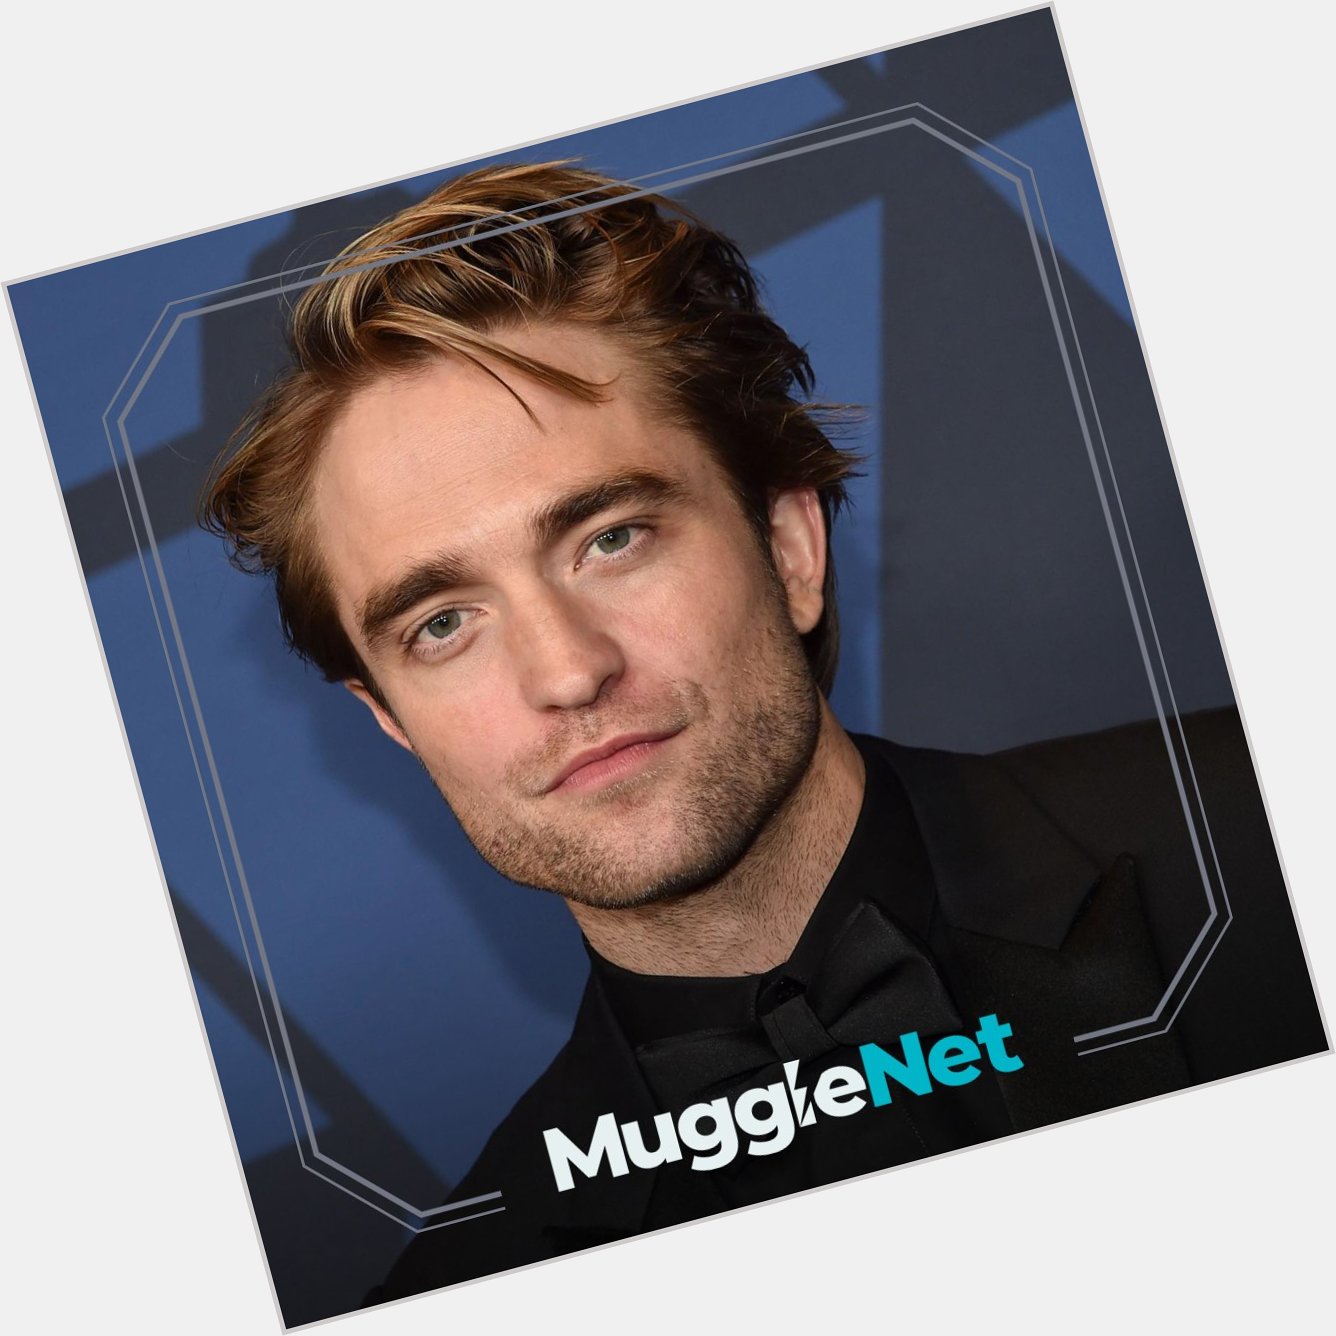 Wishing a very happy birthday to Robert Pattinson, who portrayed Cedric Diggory in the \"Harry Potter\" films! 